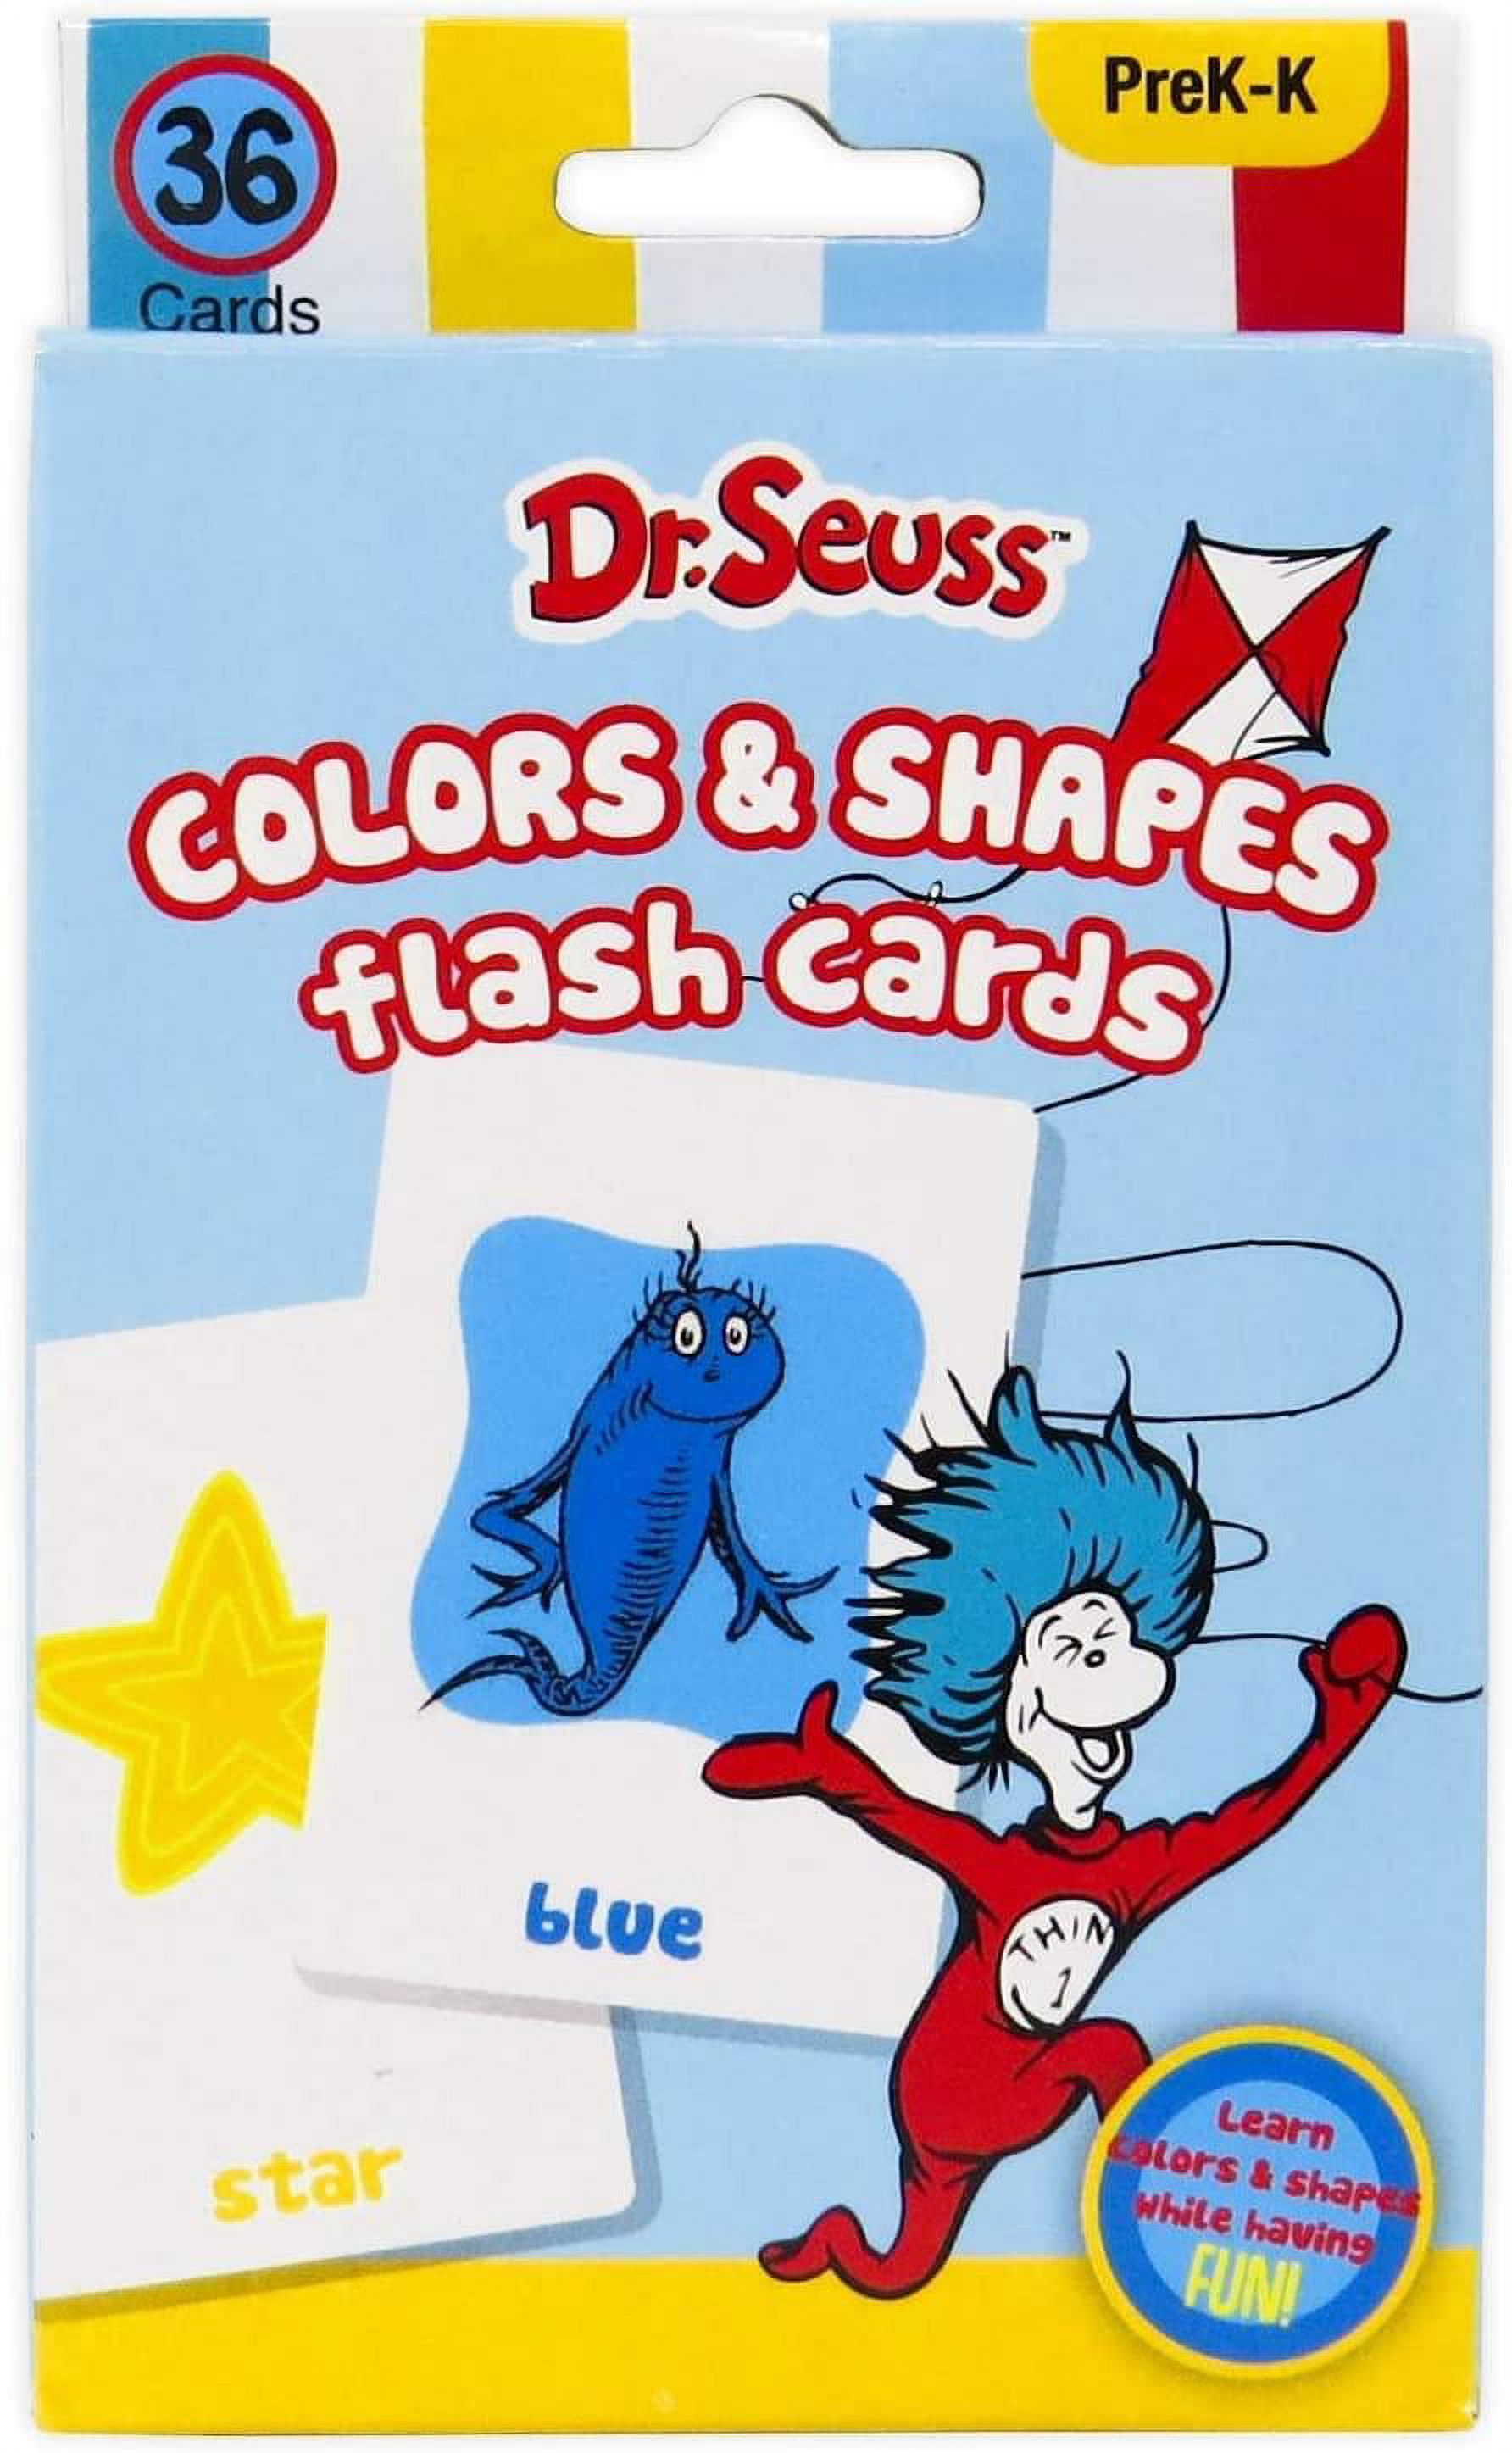 Dr. Seuss 4-in-1 Educational Flash Cards Value Pack - image 3 of 4